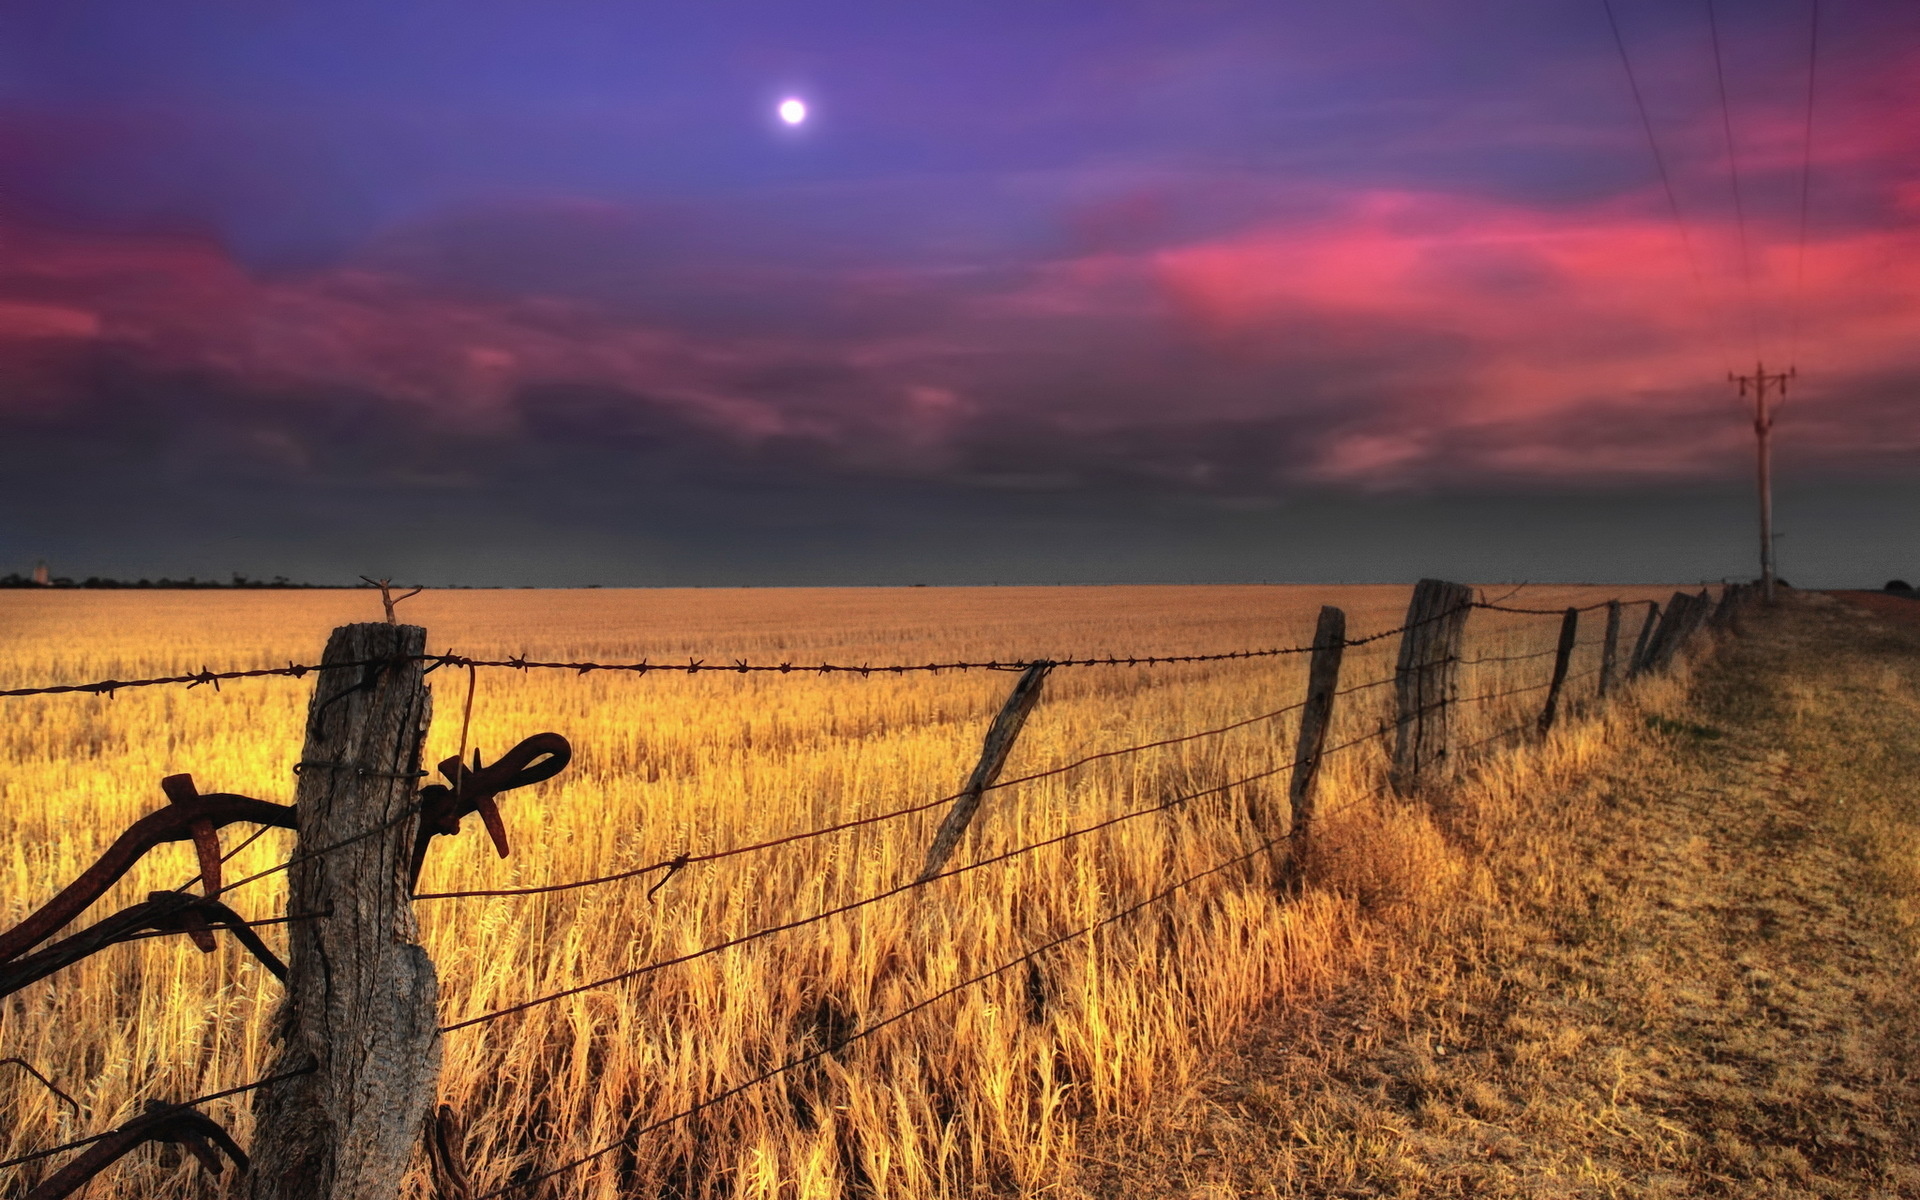 fence, Wires, Nature, Landscapes, Fields, Wheat, Grass, Pole, Rustic, Farm, Sky, Clouds, Sunset, Sunrise Wallpaper